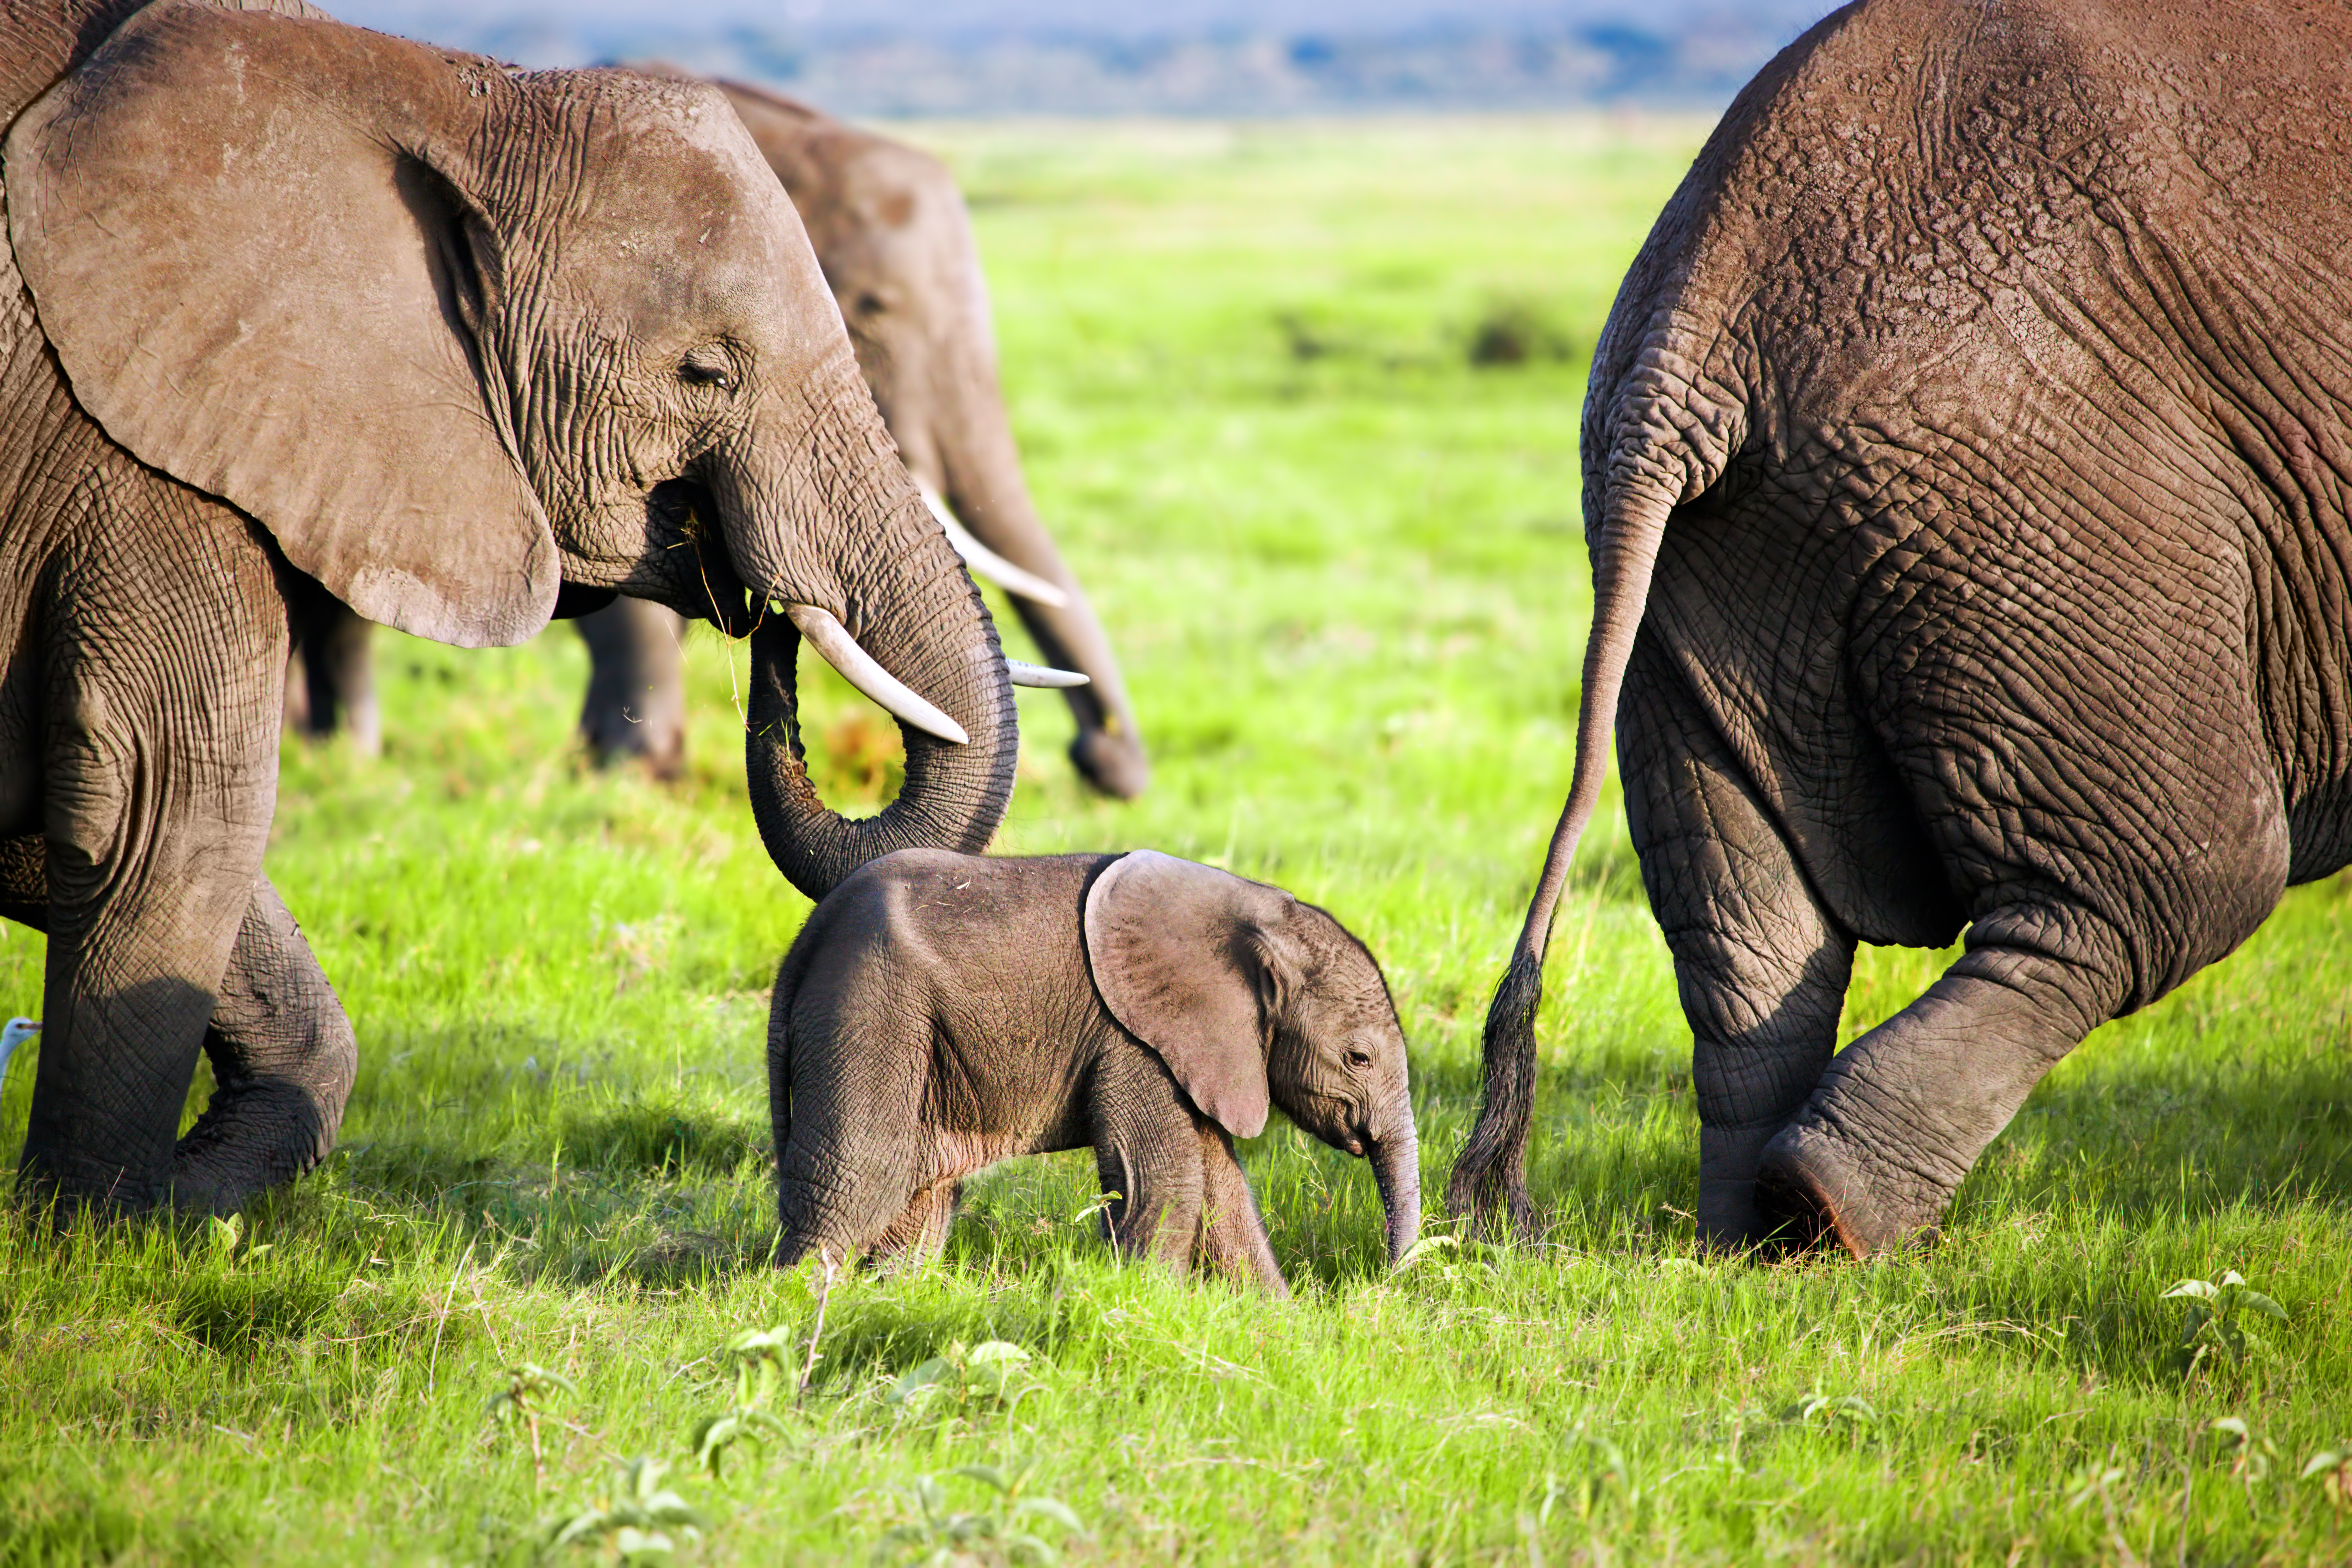 10 Day Amazing Safari During Your Family Vacation in Kenya - Elephants in Amboseli National Park